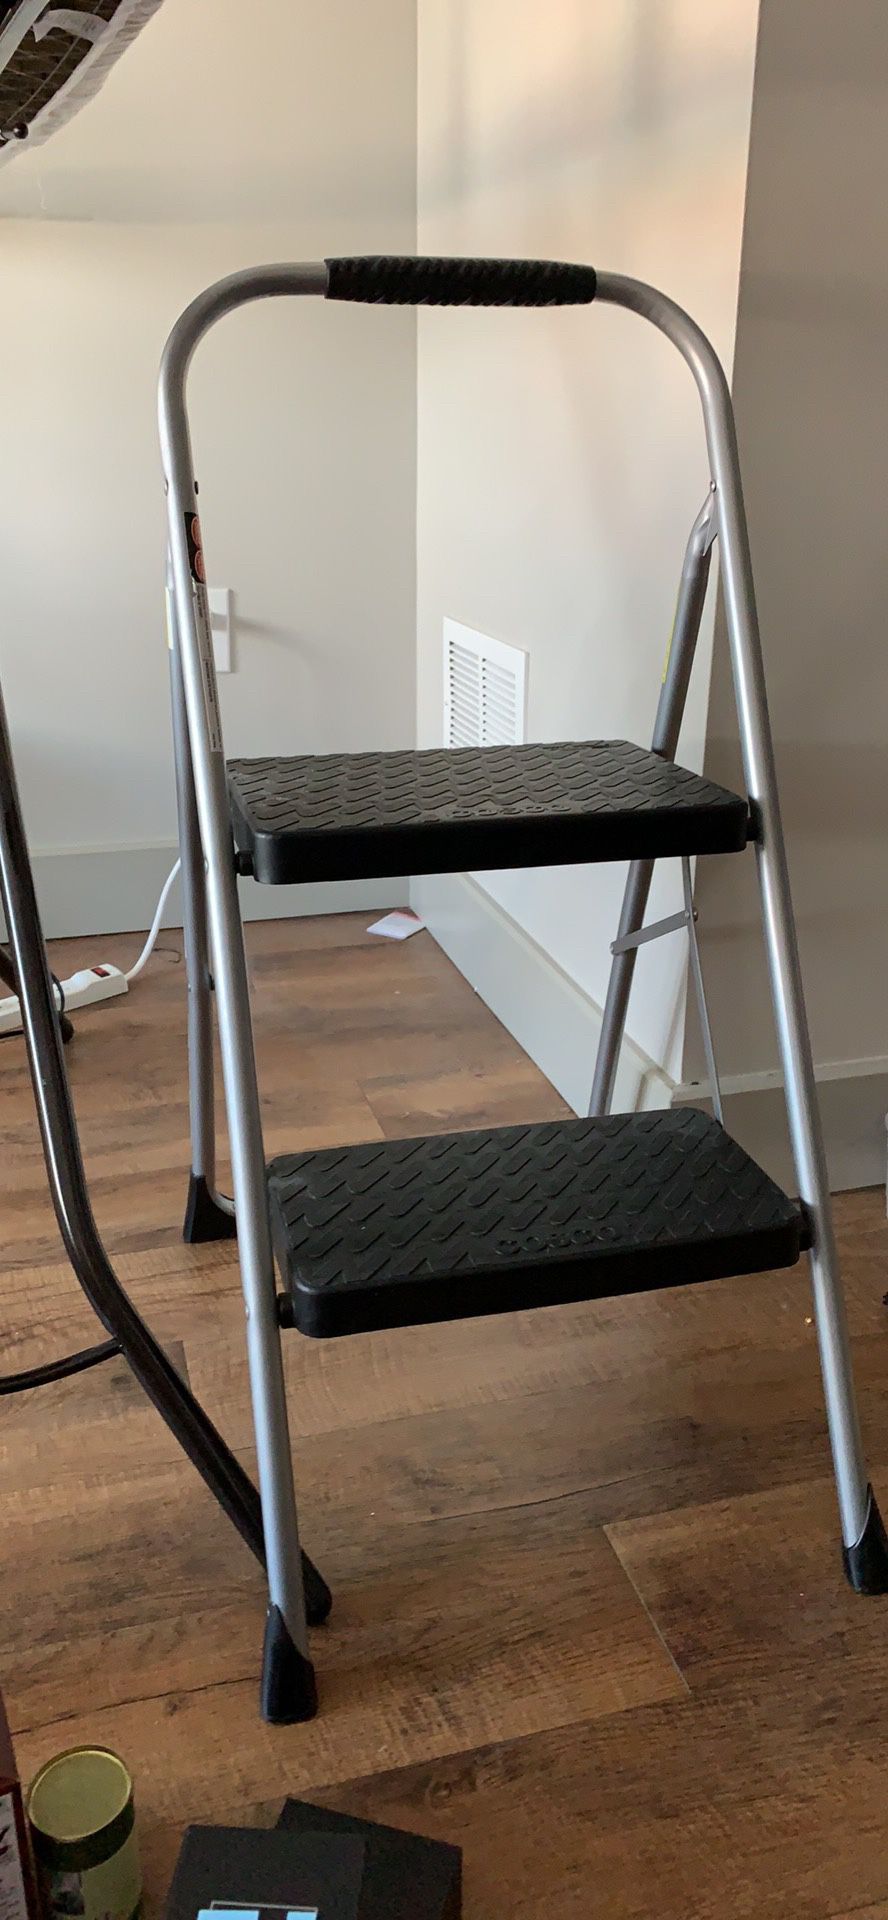 Barely used 2 step - step ladder (items added for scale)